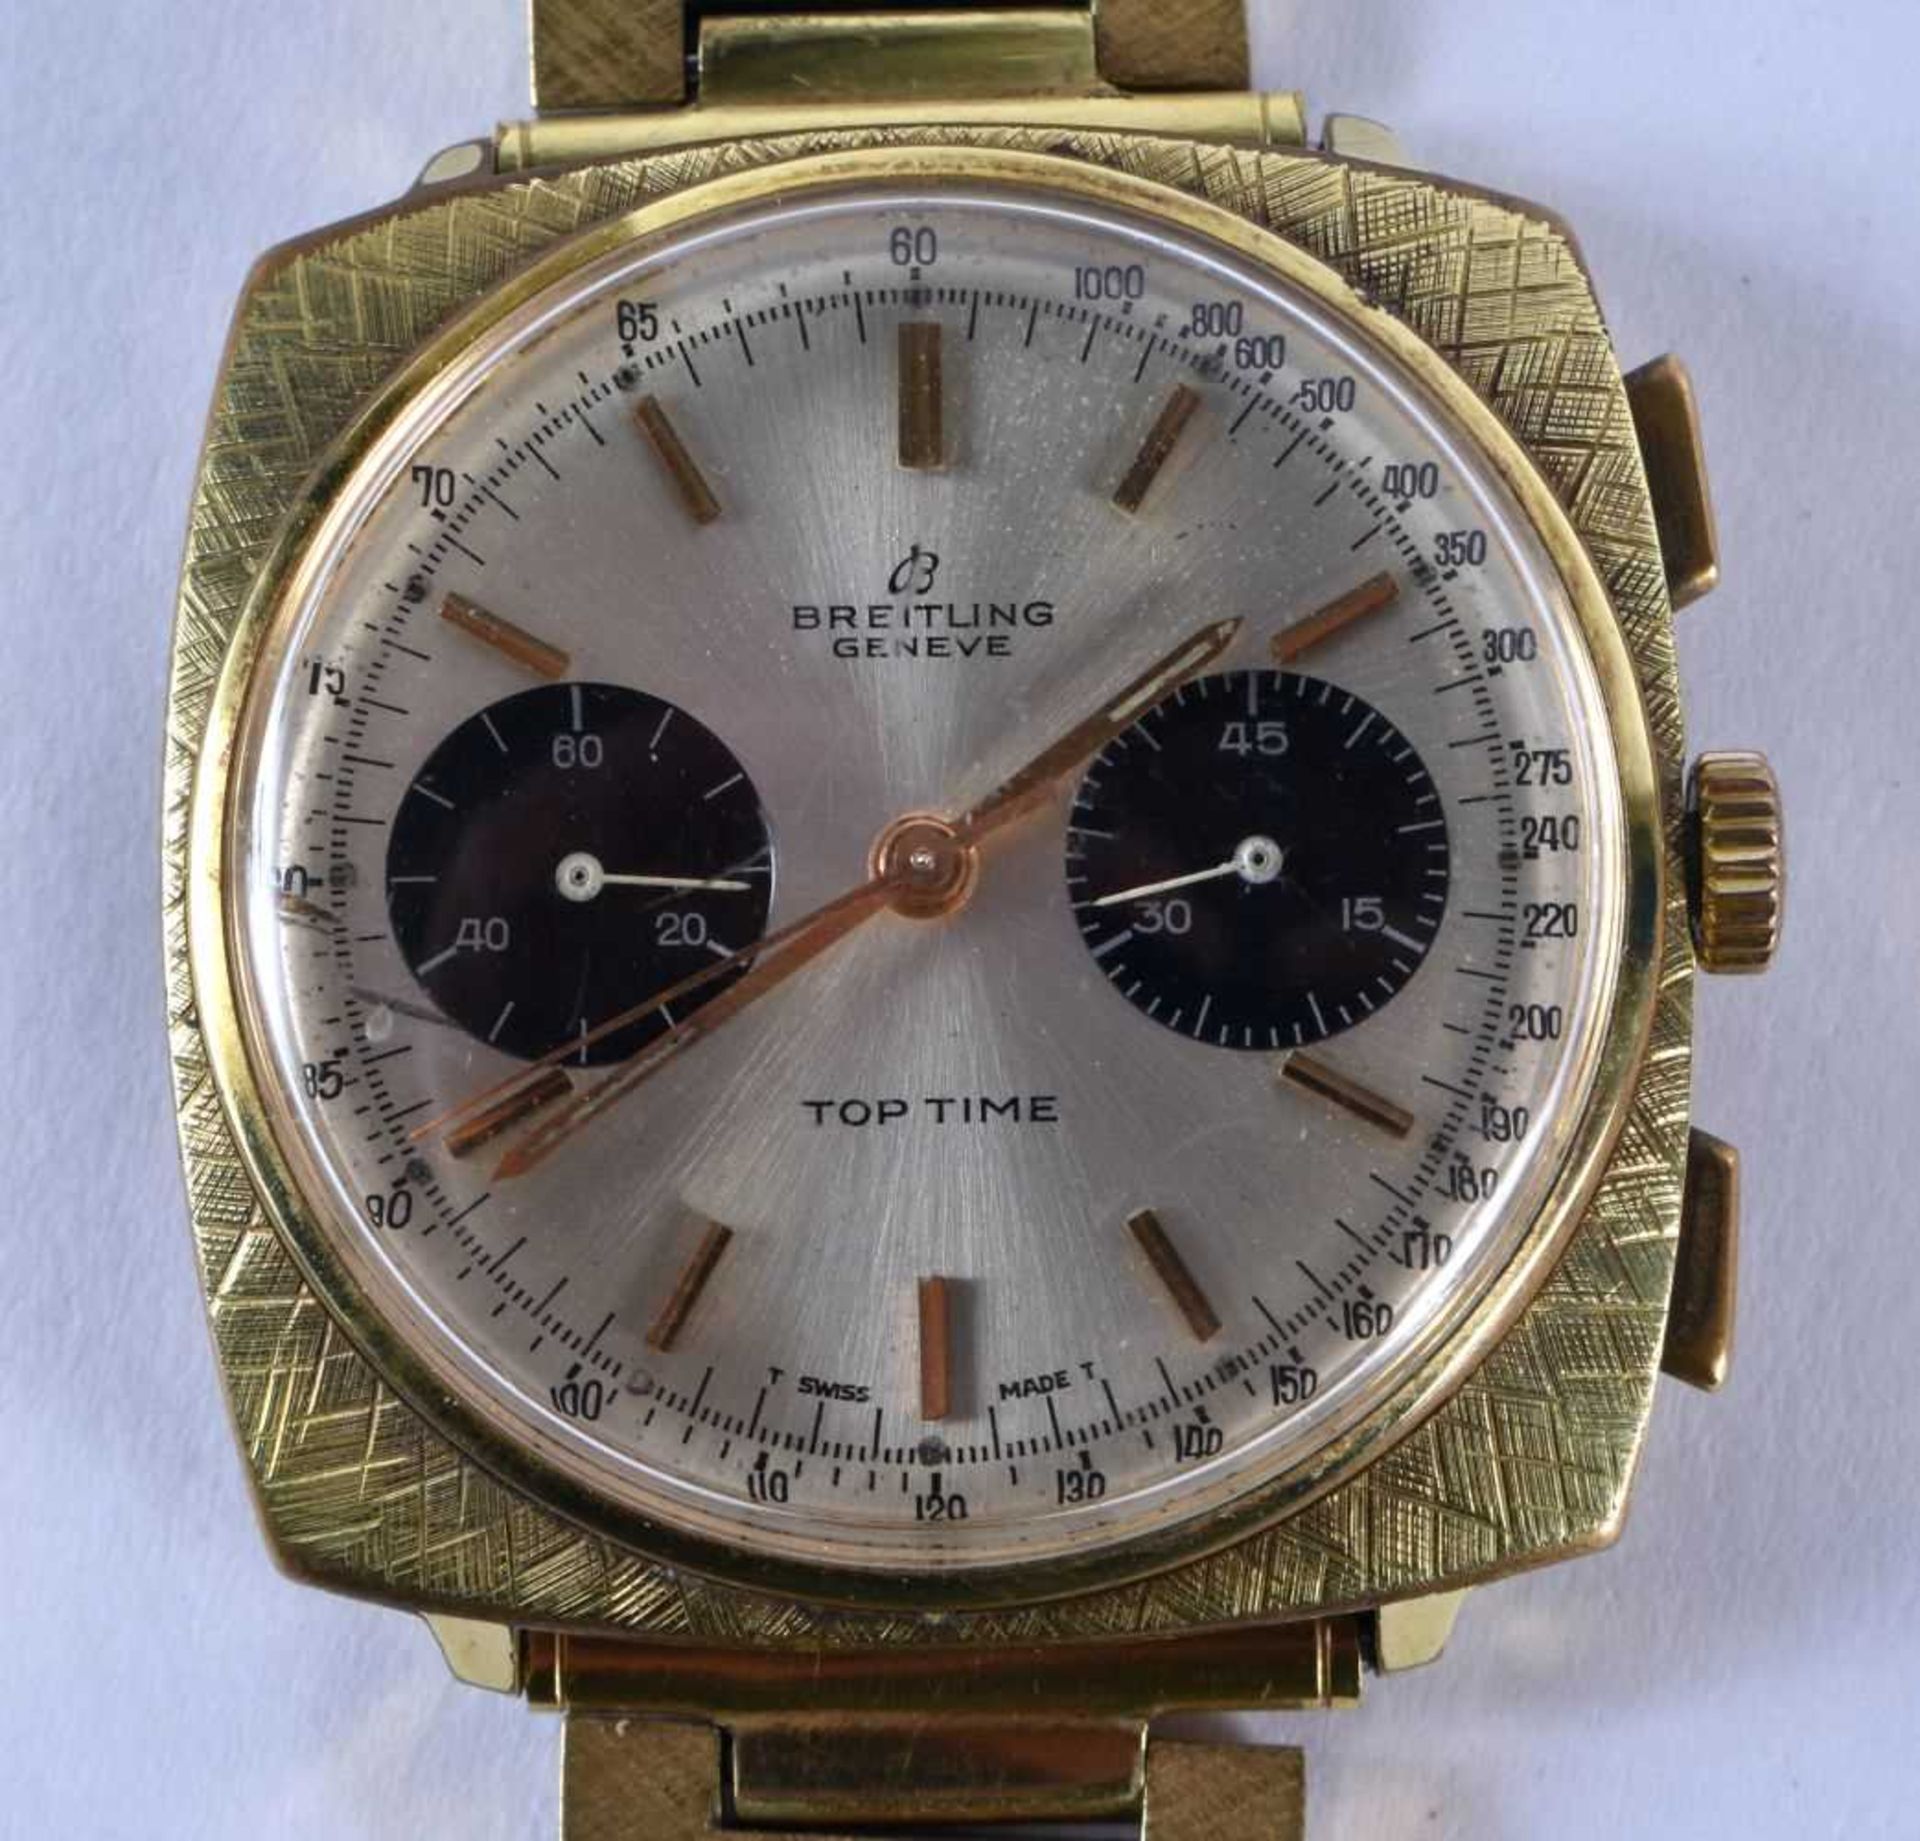 Vintage Breitling Top Time Chronograph Men's Watch Ref 2009.  Dial 3.5cm incl crown, working